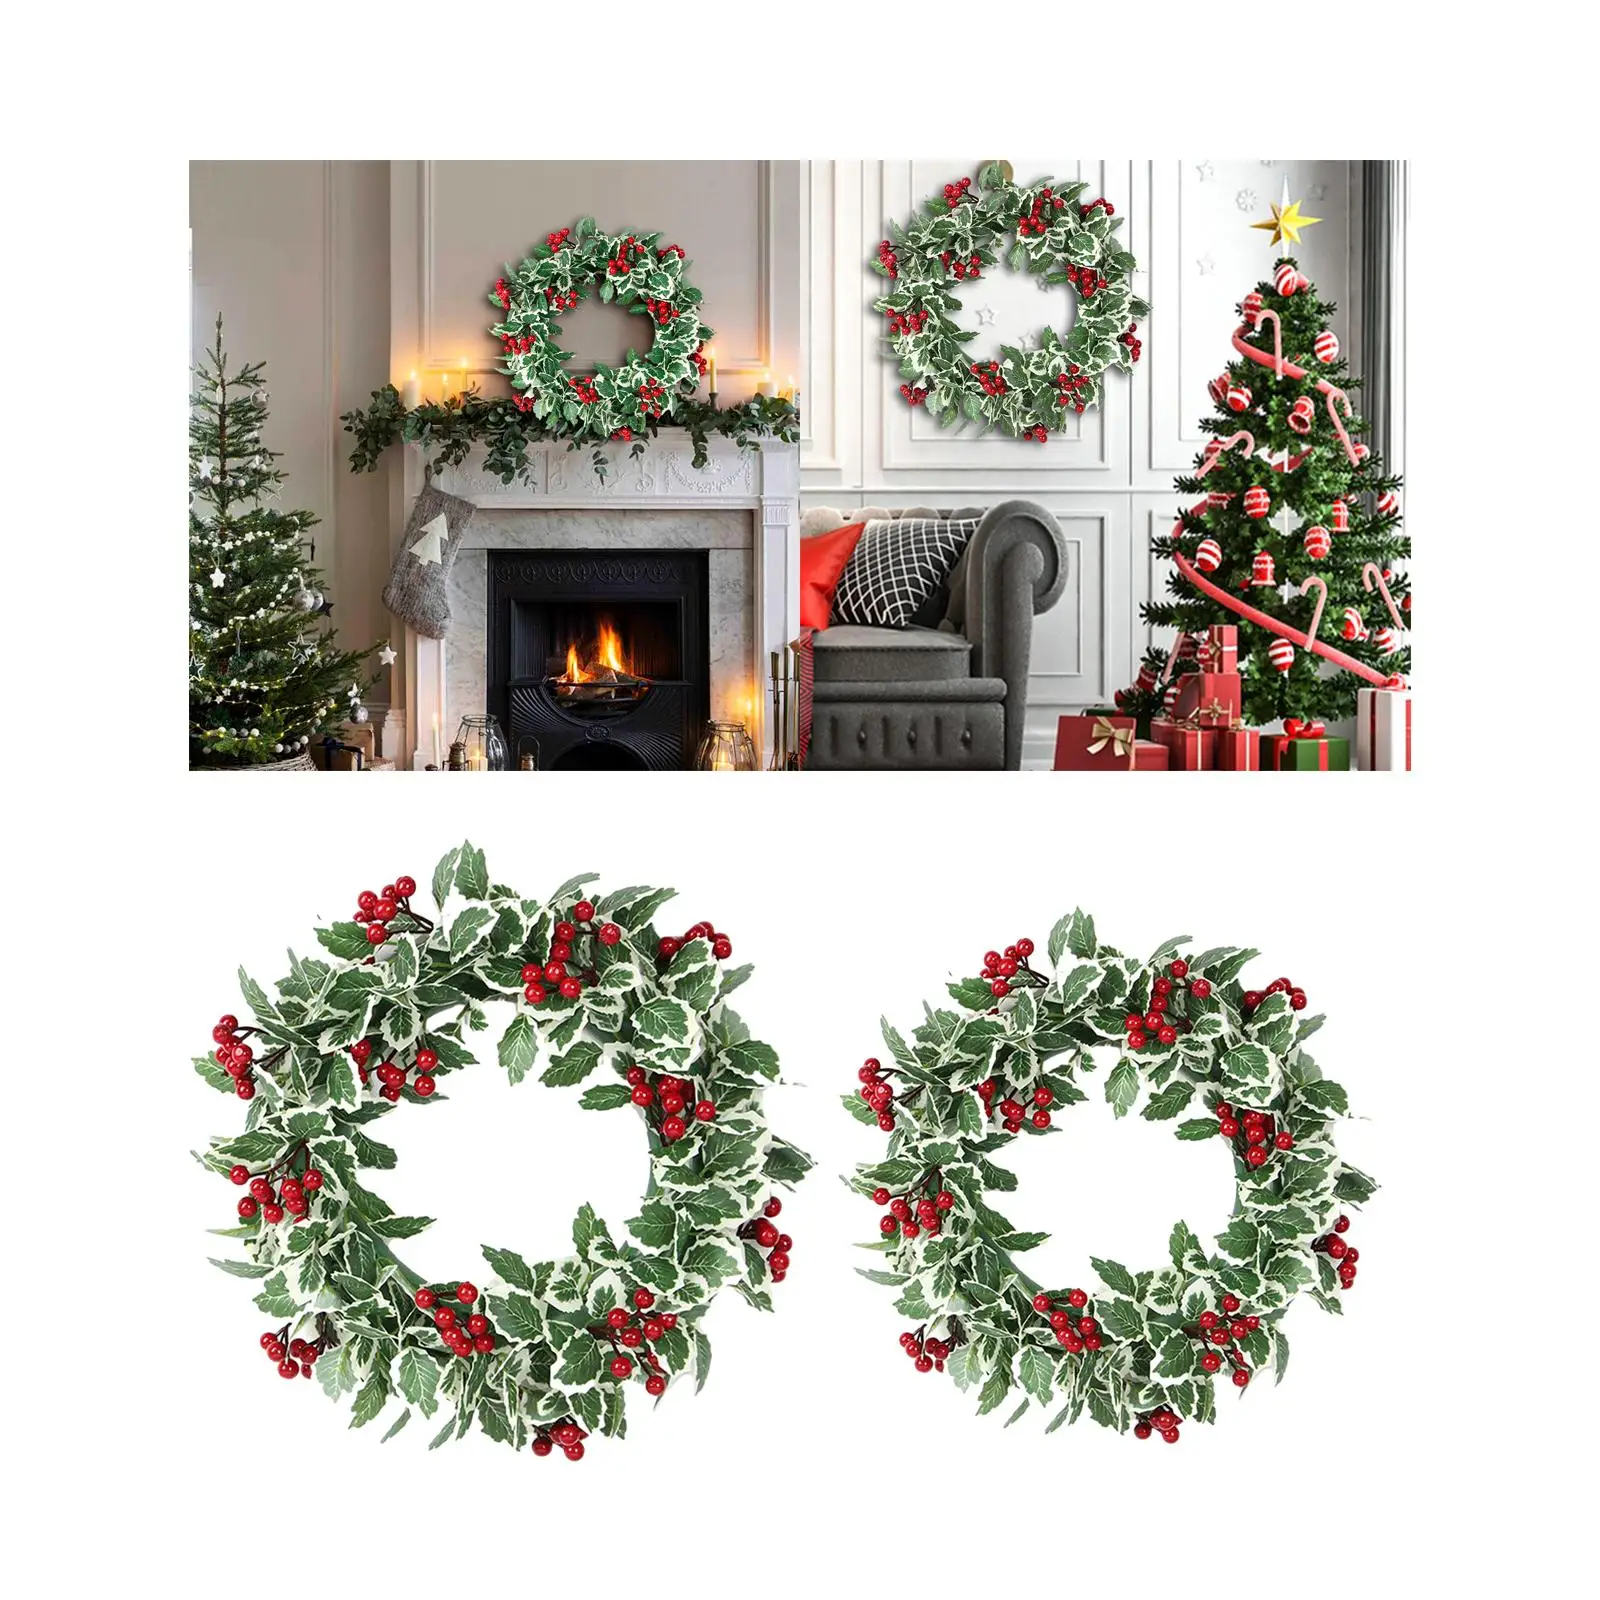 Artificial Christmas Wreath Door Ornaments Indoor Outdoor Holiday Garland Decoration for Wedding Party Wall Fireplace Garden